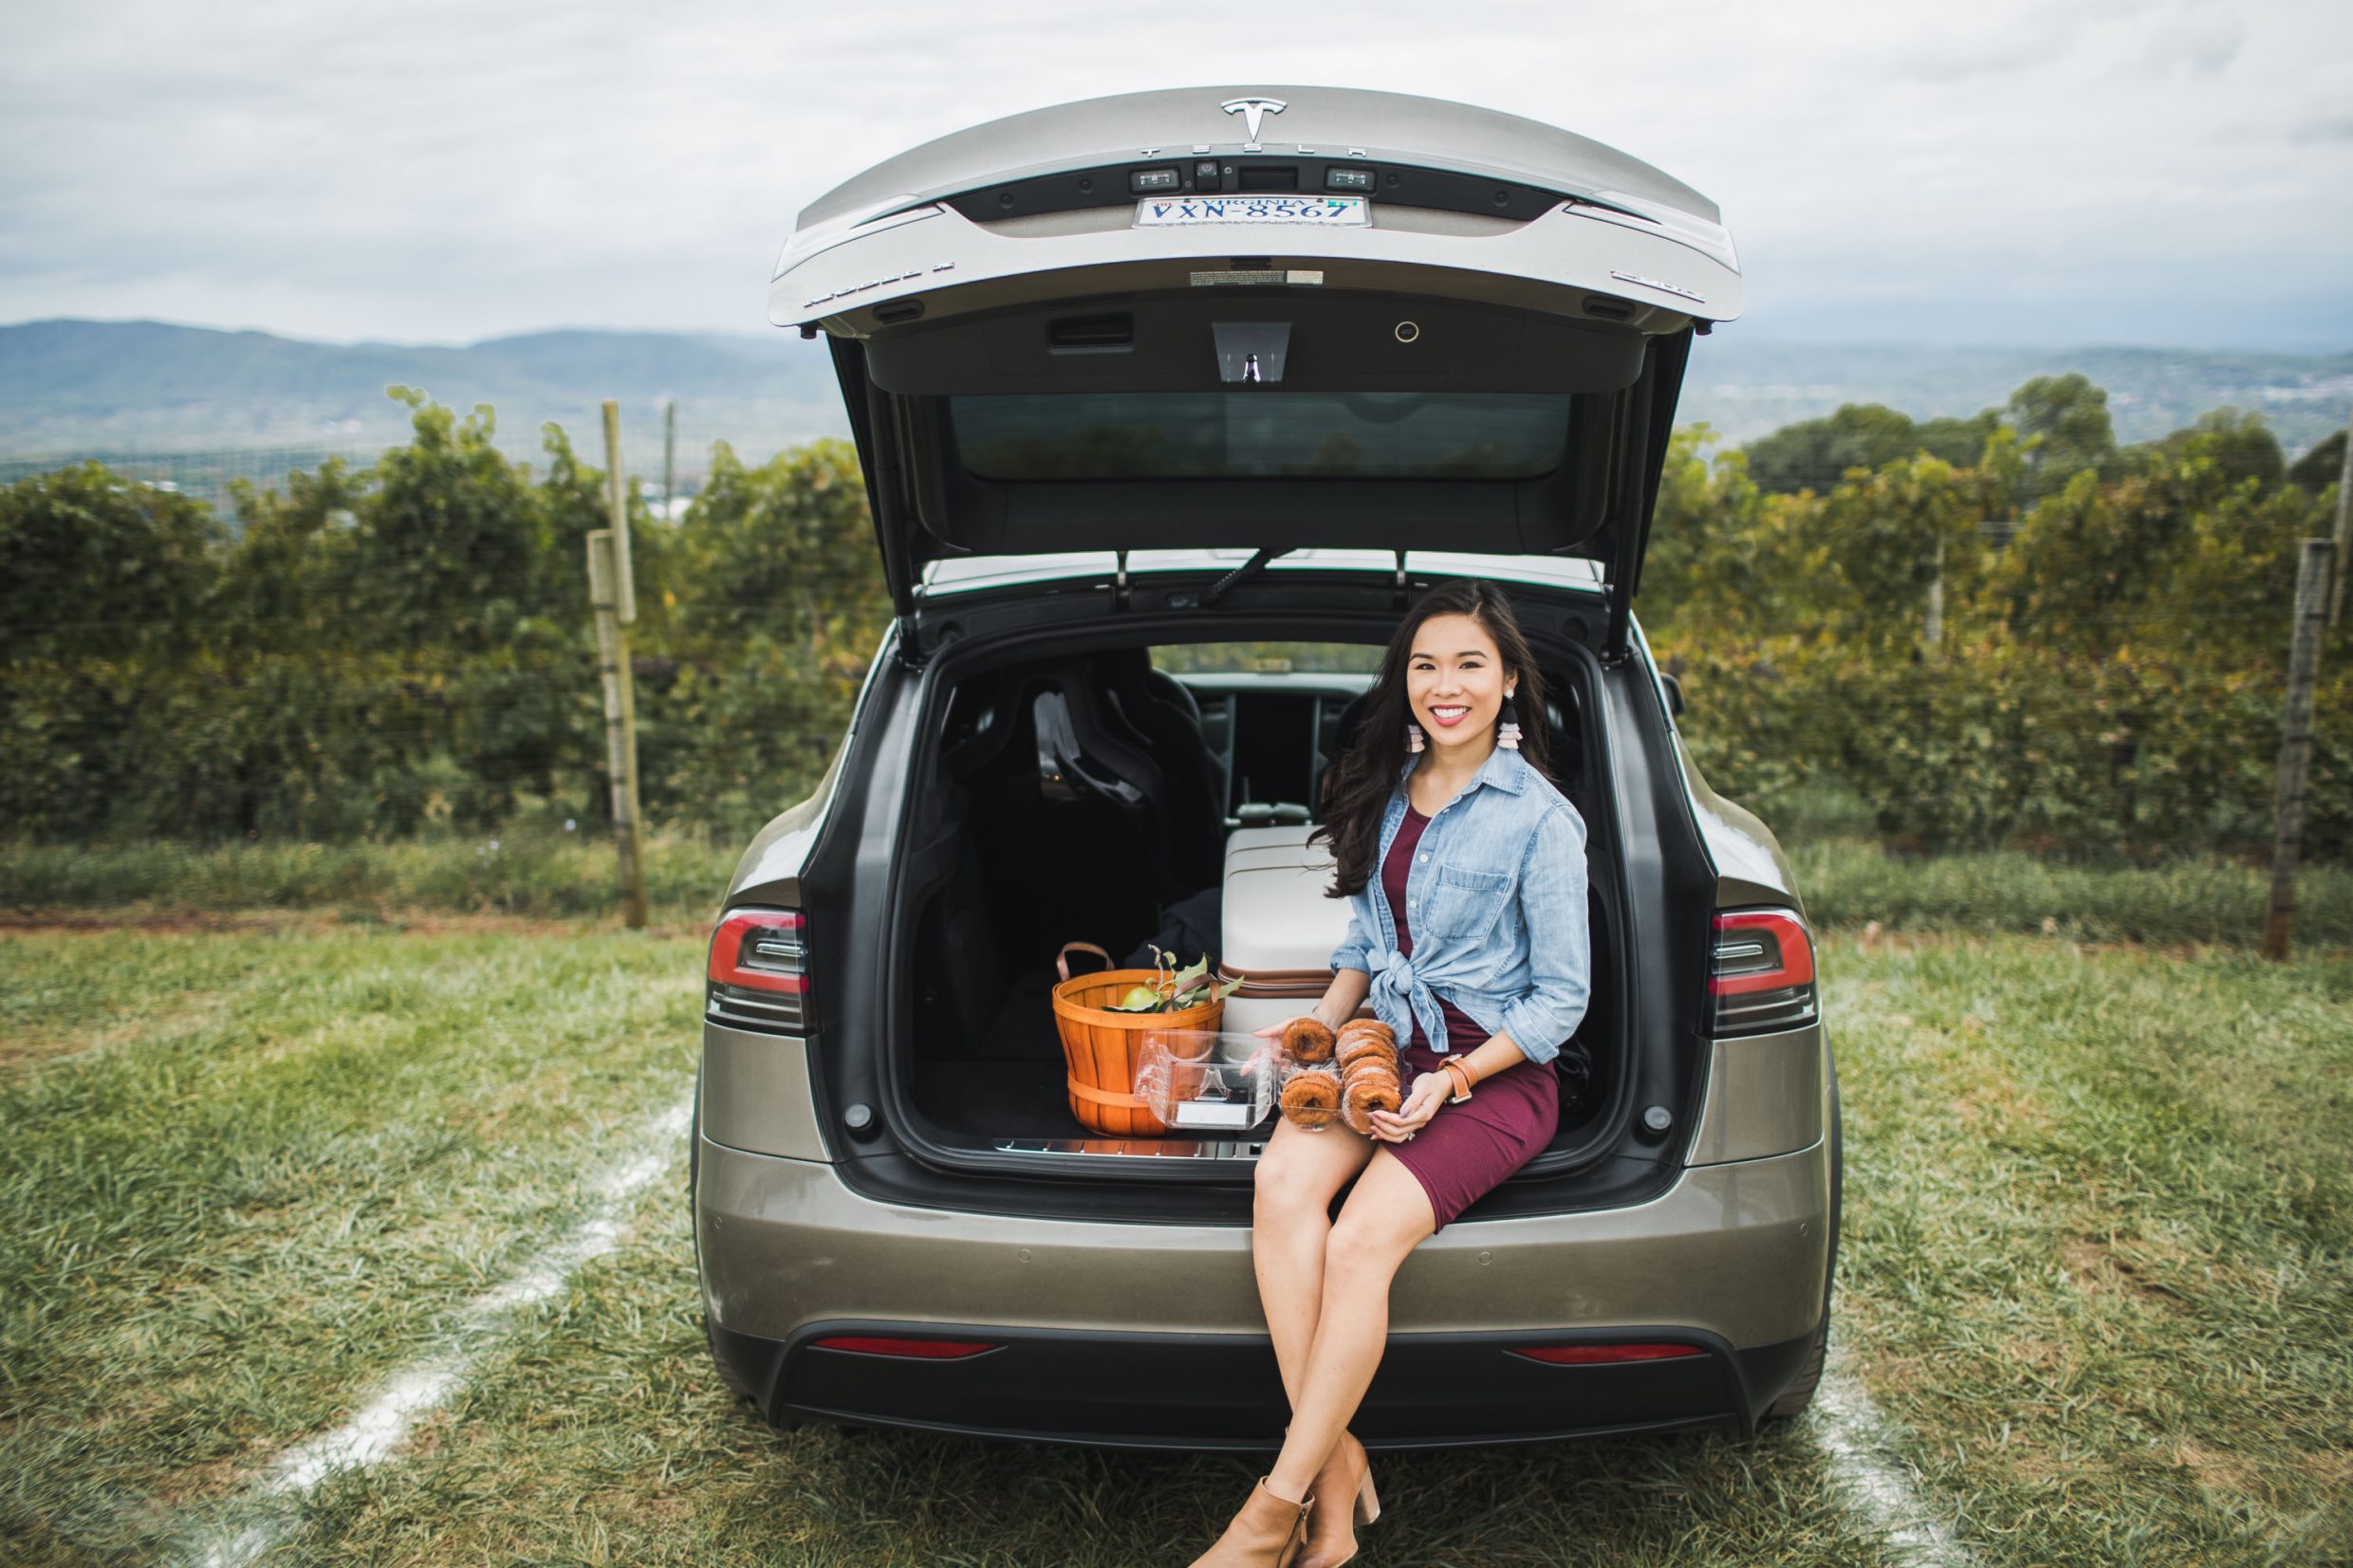 Blogger Hoang-Kim goes apple picking at Carter Mountain Orchard in a Tesla Model X